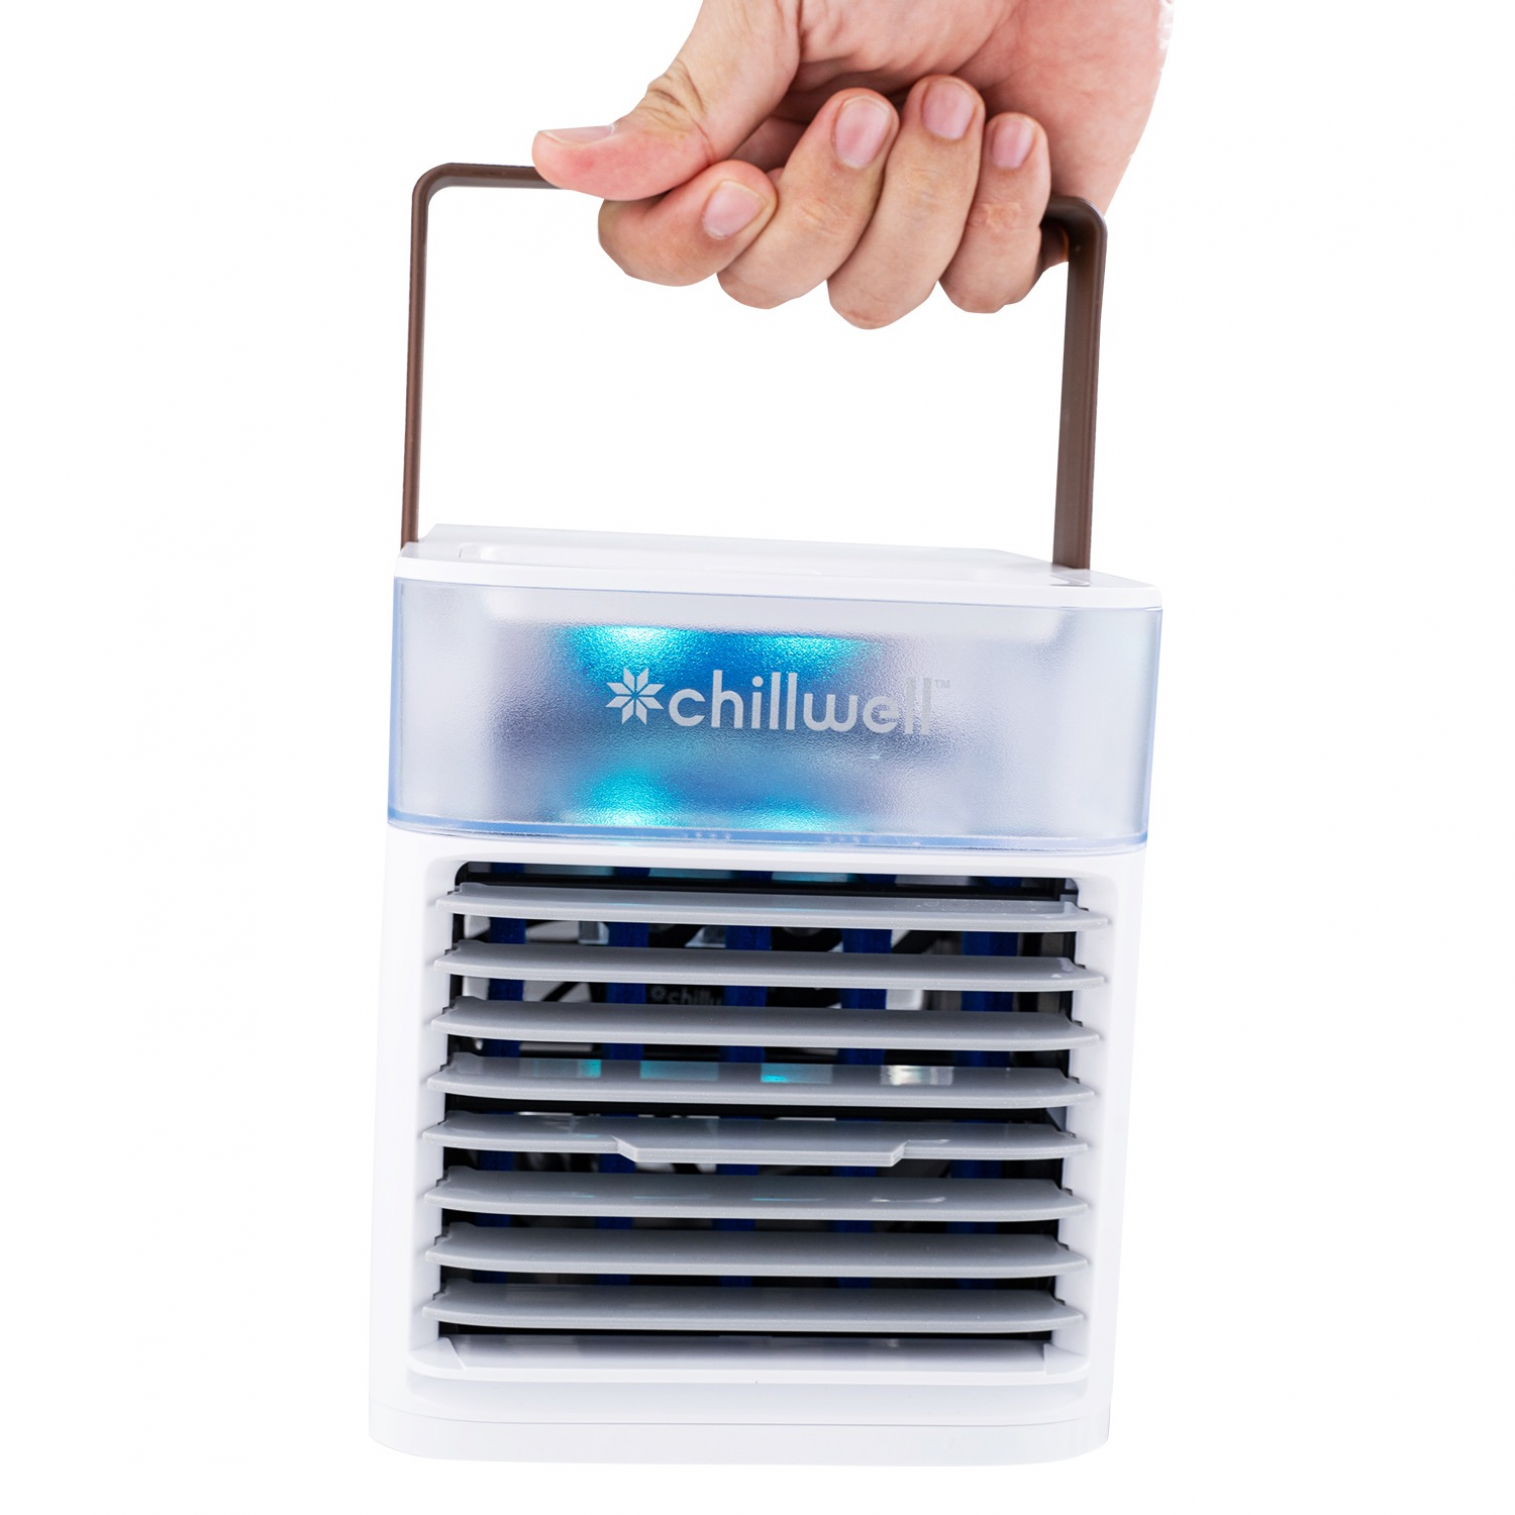 Portable Chillwell AC Reviews